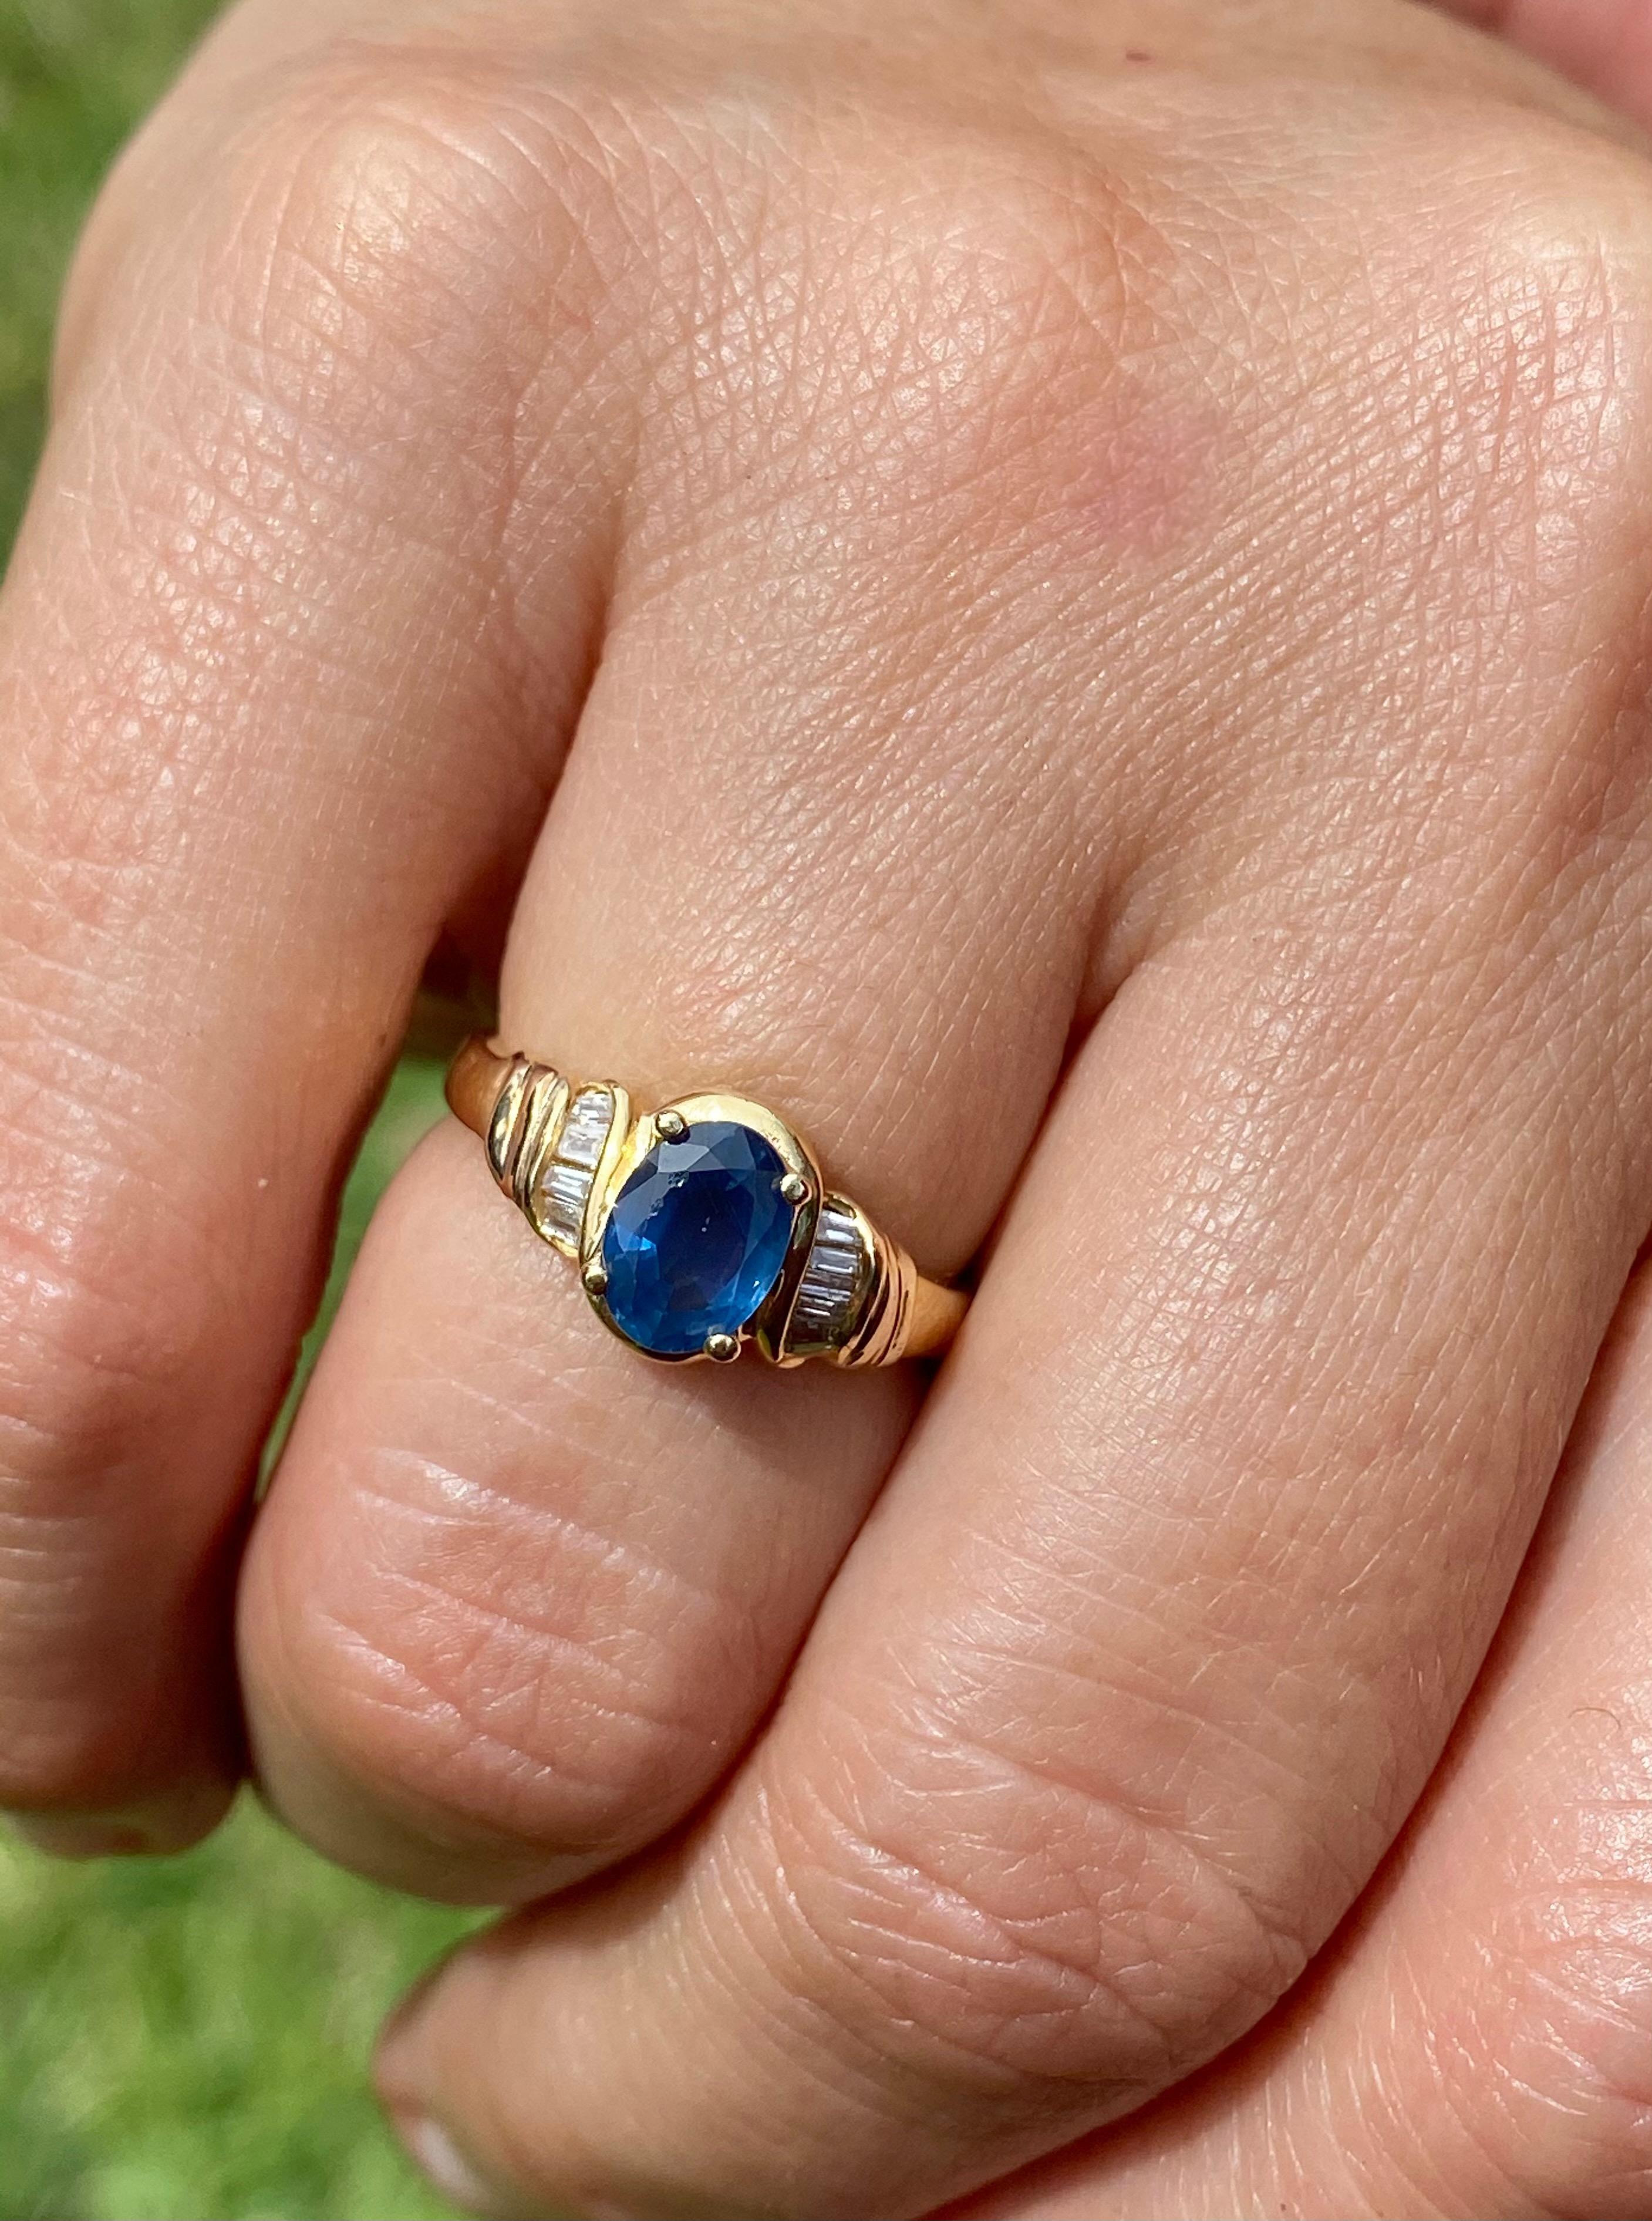 Centering a 1.22 Carat Oval Cut Ceylon (Sri Lanka) Sapphire, accented by 8 Round-Brilliant Cut Diamonds totaling 0.14 Carats, and set in 18K Yellow Gold.

Details:
✔ Gold Karat: 14K 
✔ Sapphire Weight: 1.22 carats
✔ Sapphire Origin: Ceylon (Sri